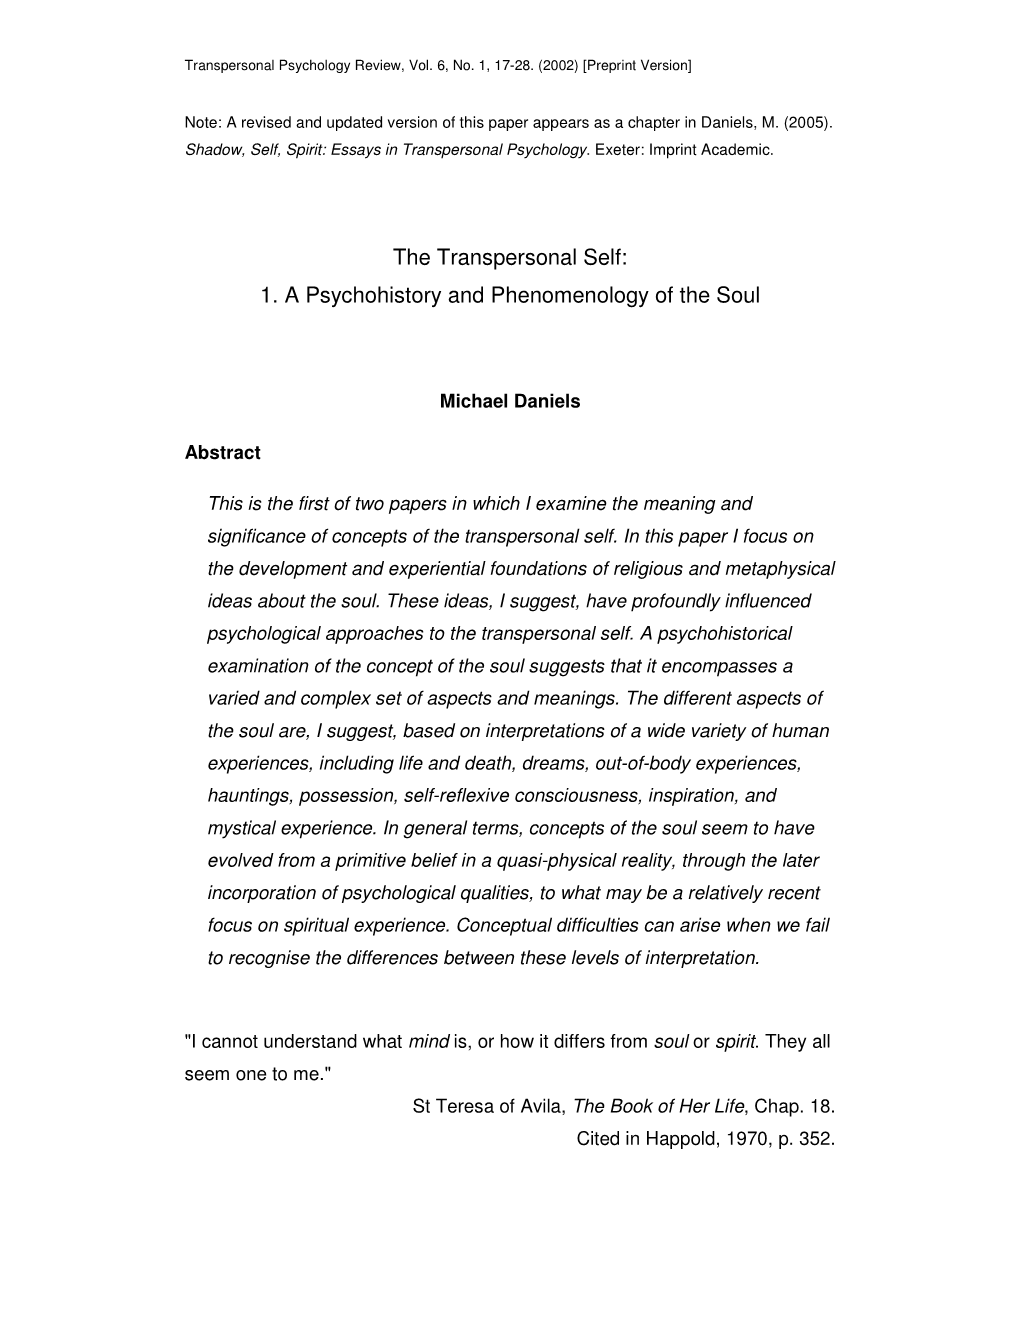 The Transpersonal Self: 1. a Psychohistory and Phenomenology of the Soul